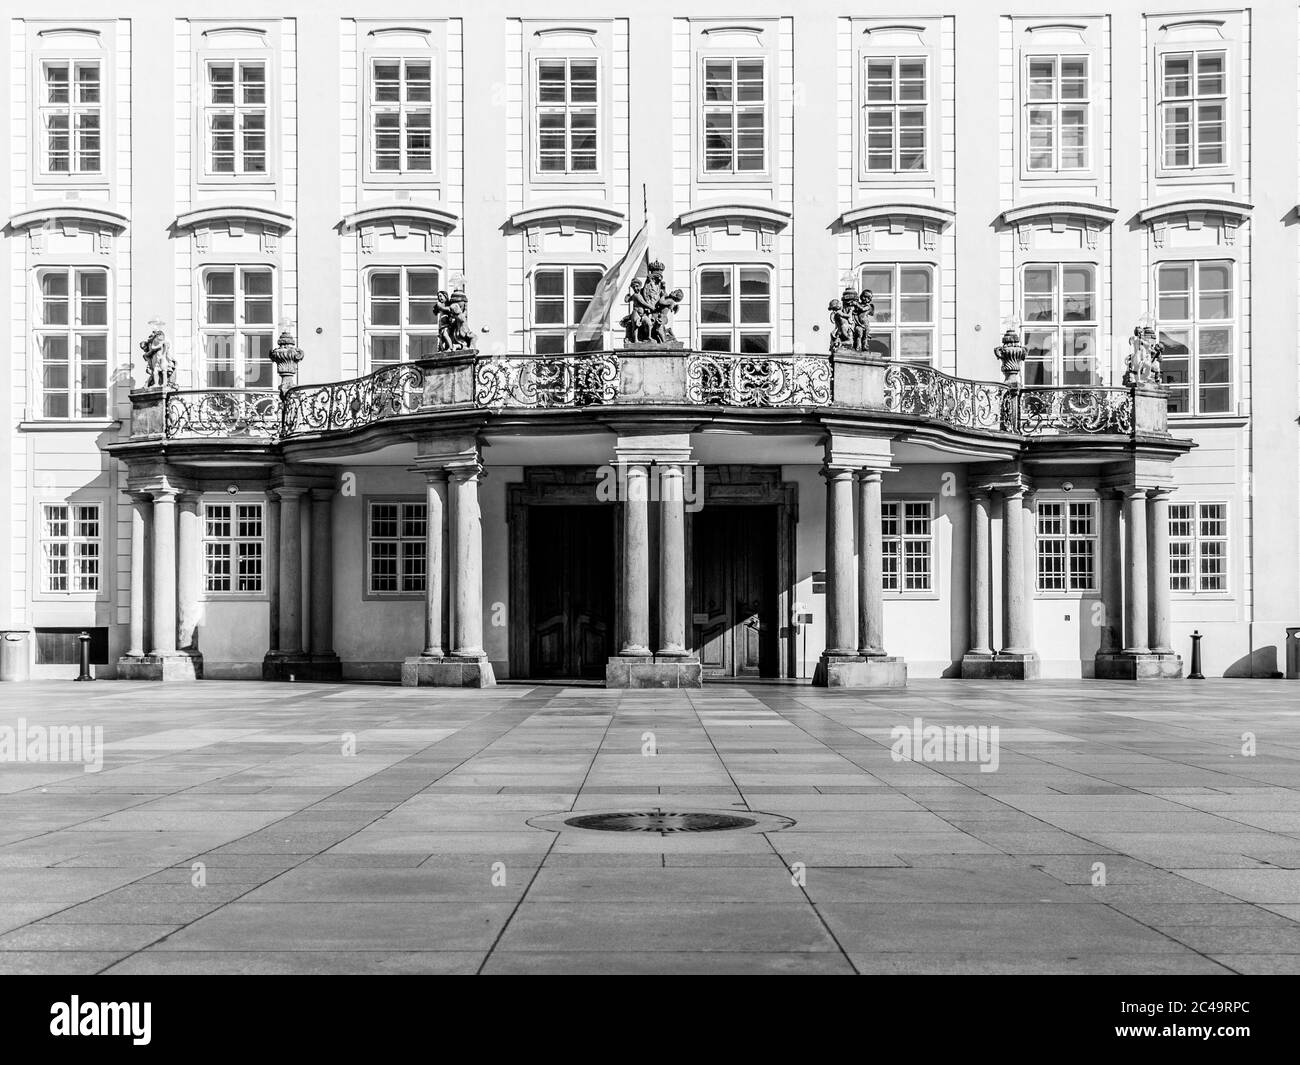 Prague Castle - entrance door with balcony to the Archives on Third Courtyard, Prague, Czech Republic. Black and white image. Stock Photo